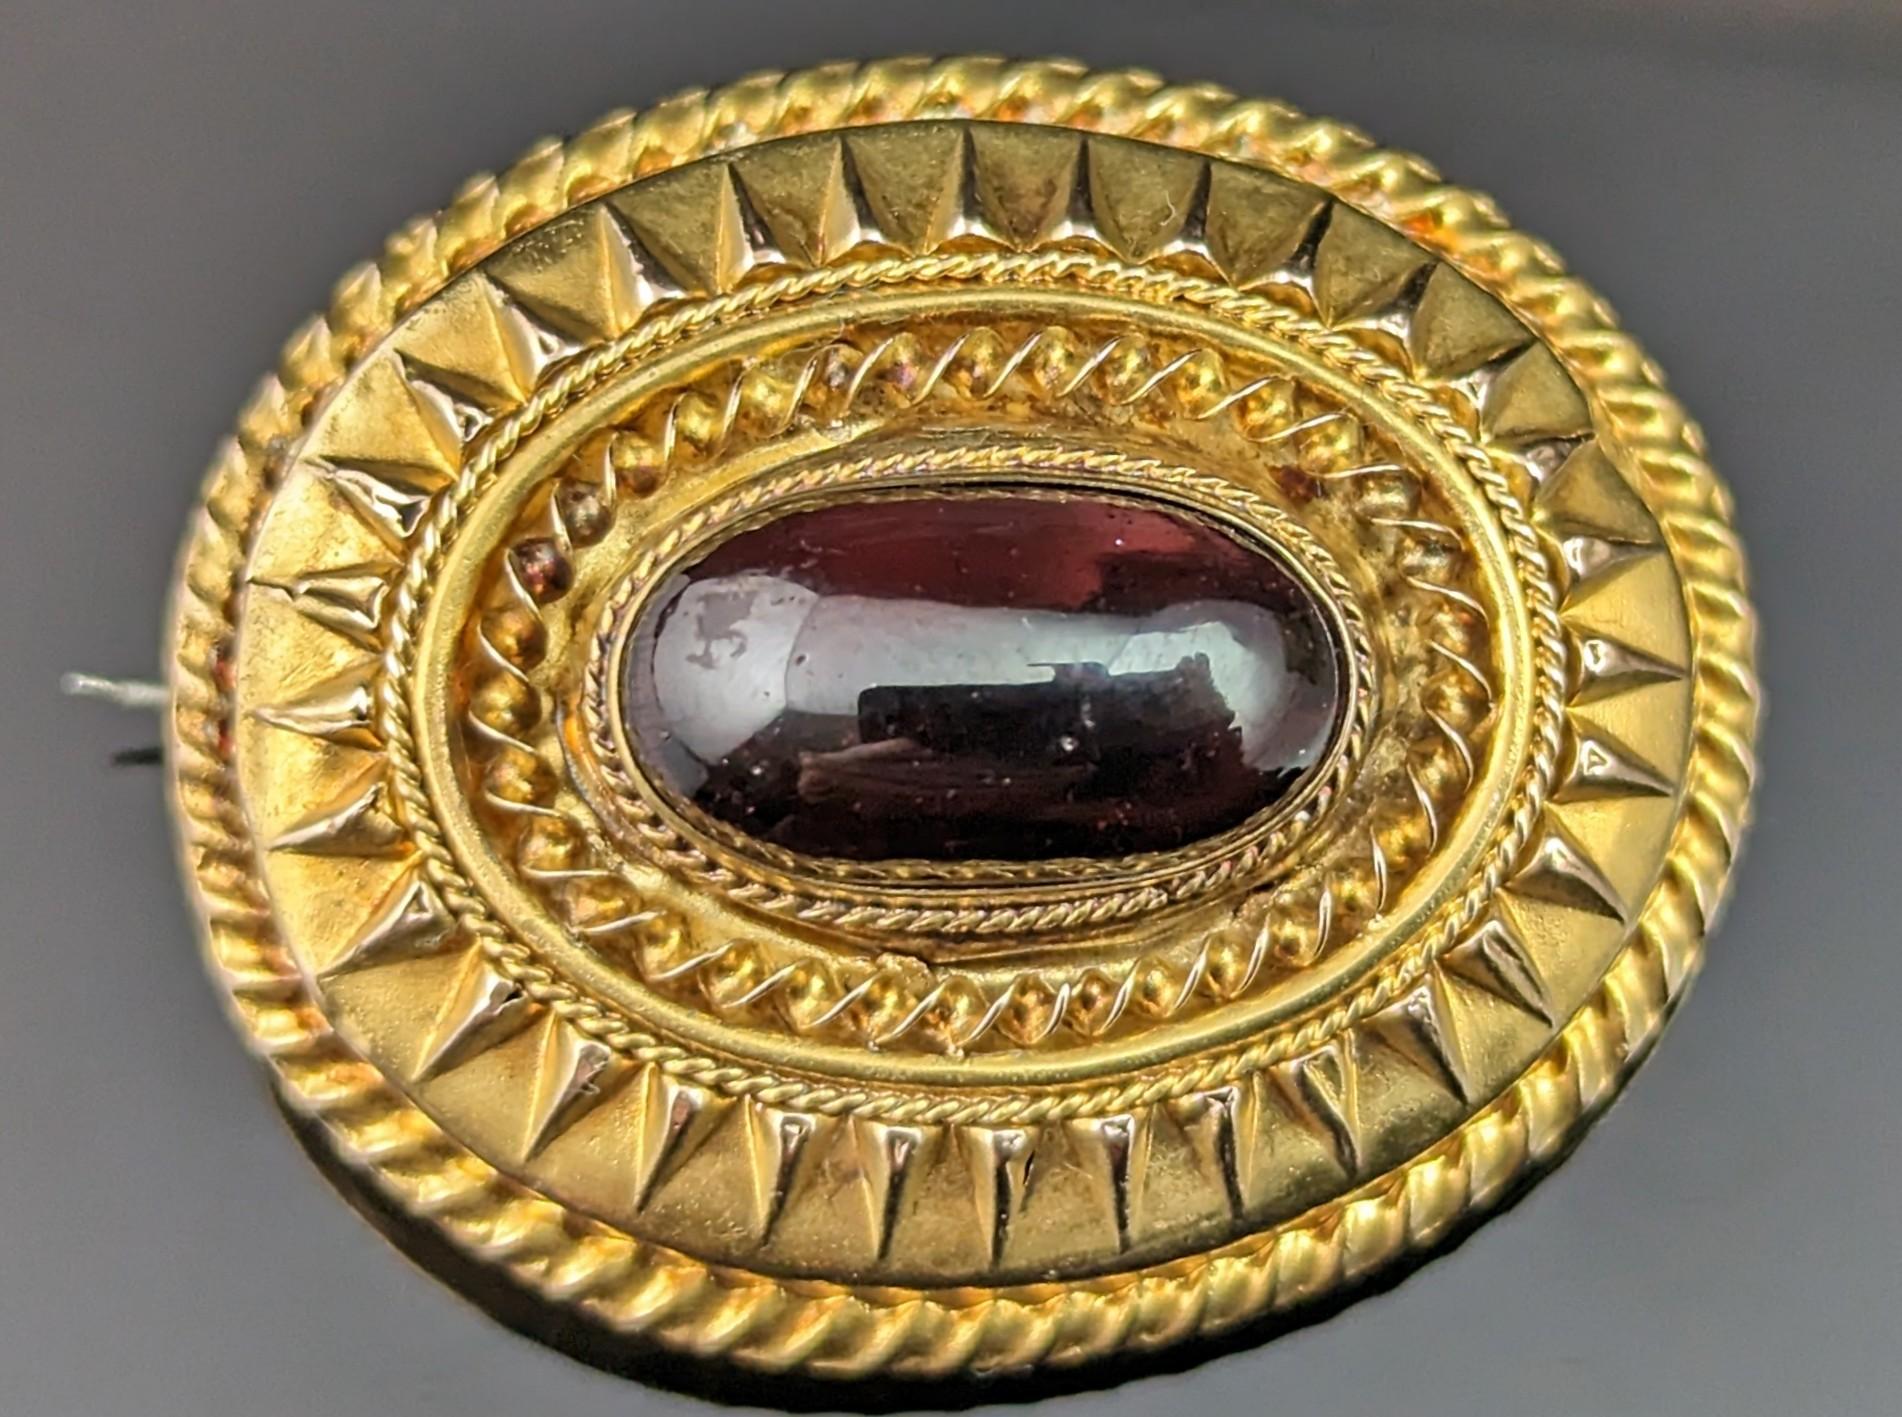 This antique Mid Victorian Garnet Cabochon brooch is delightfully beautiful.

Rich buttery 9ct bloomed yellow gold, the attractive Etruscan revival style featuring a repousse star or sunburst design with rope twist highlights.

This houses a big,